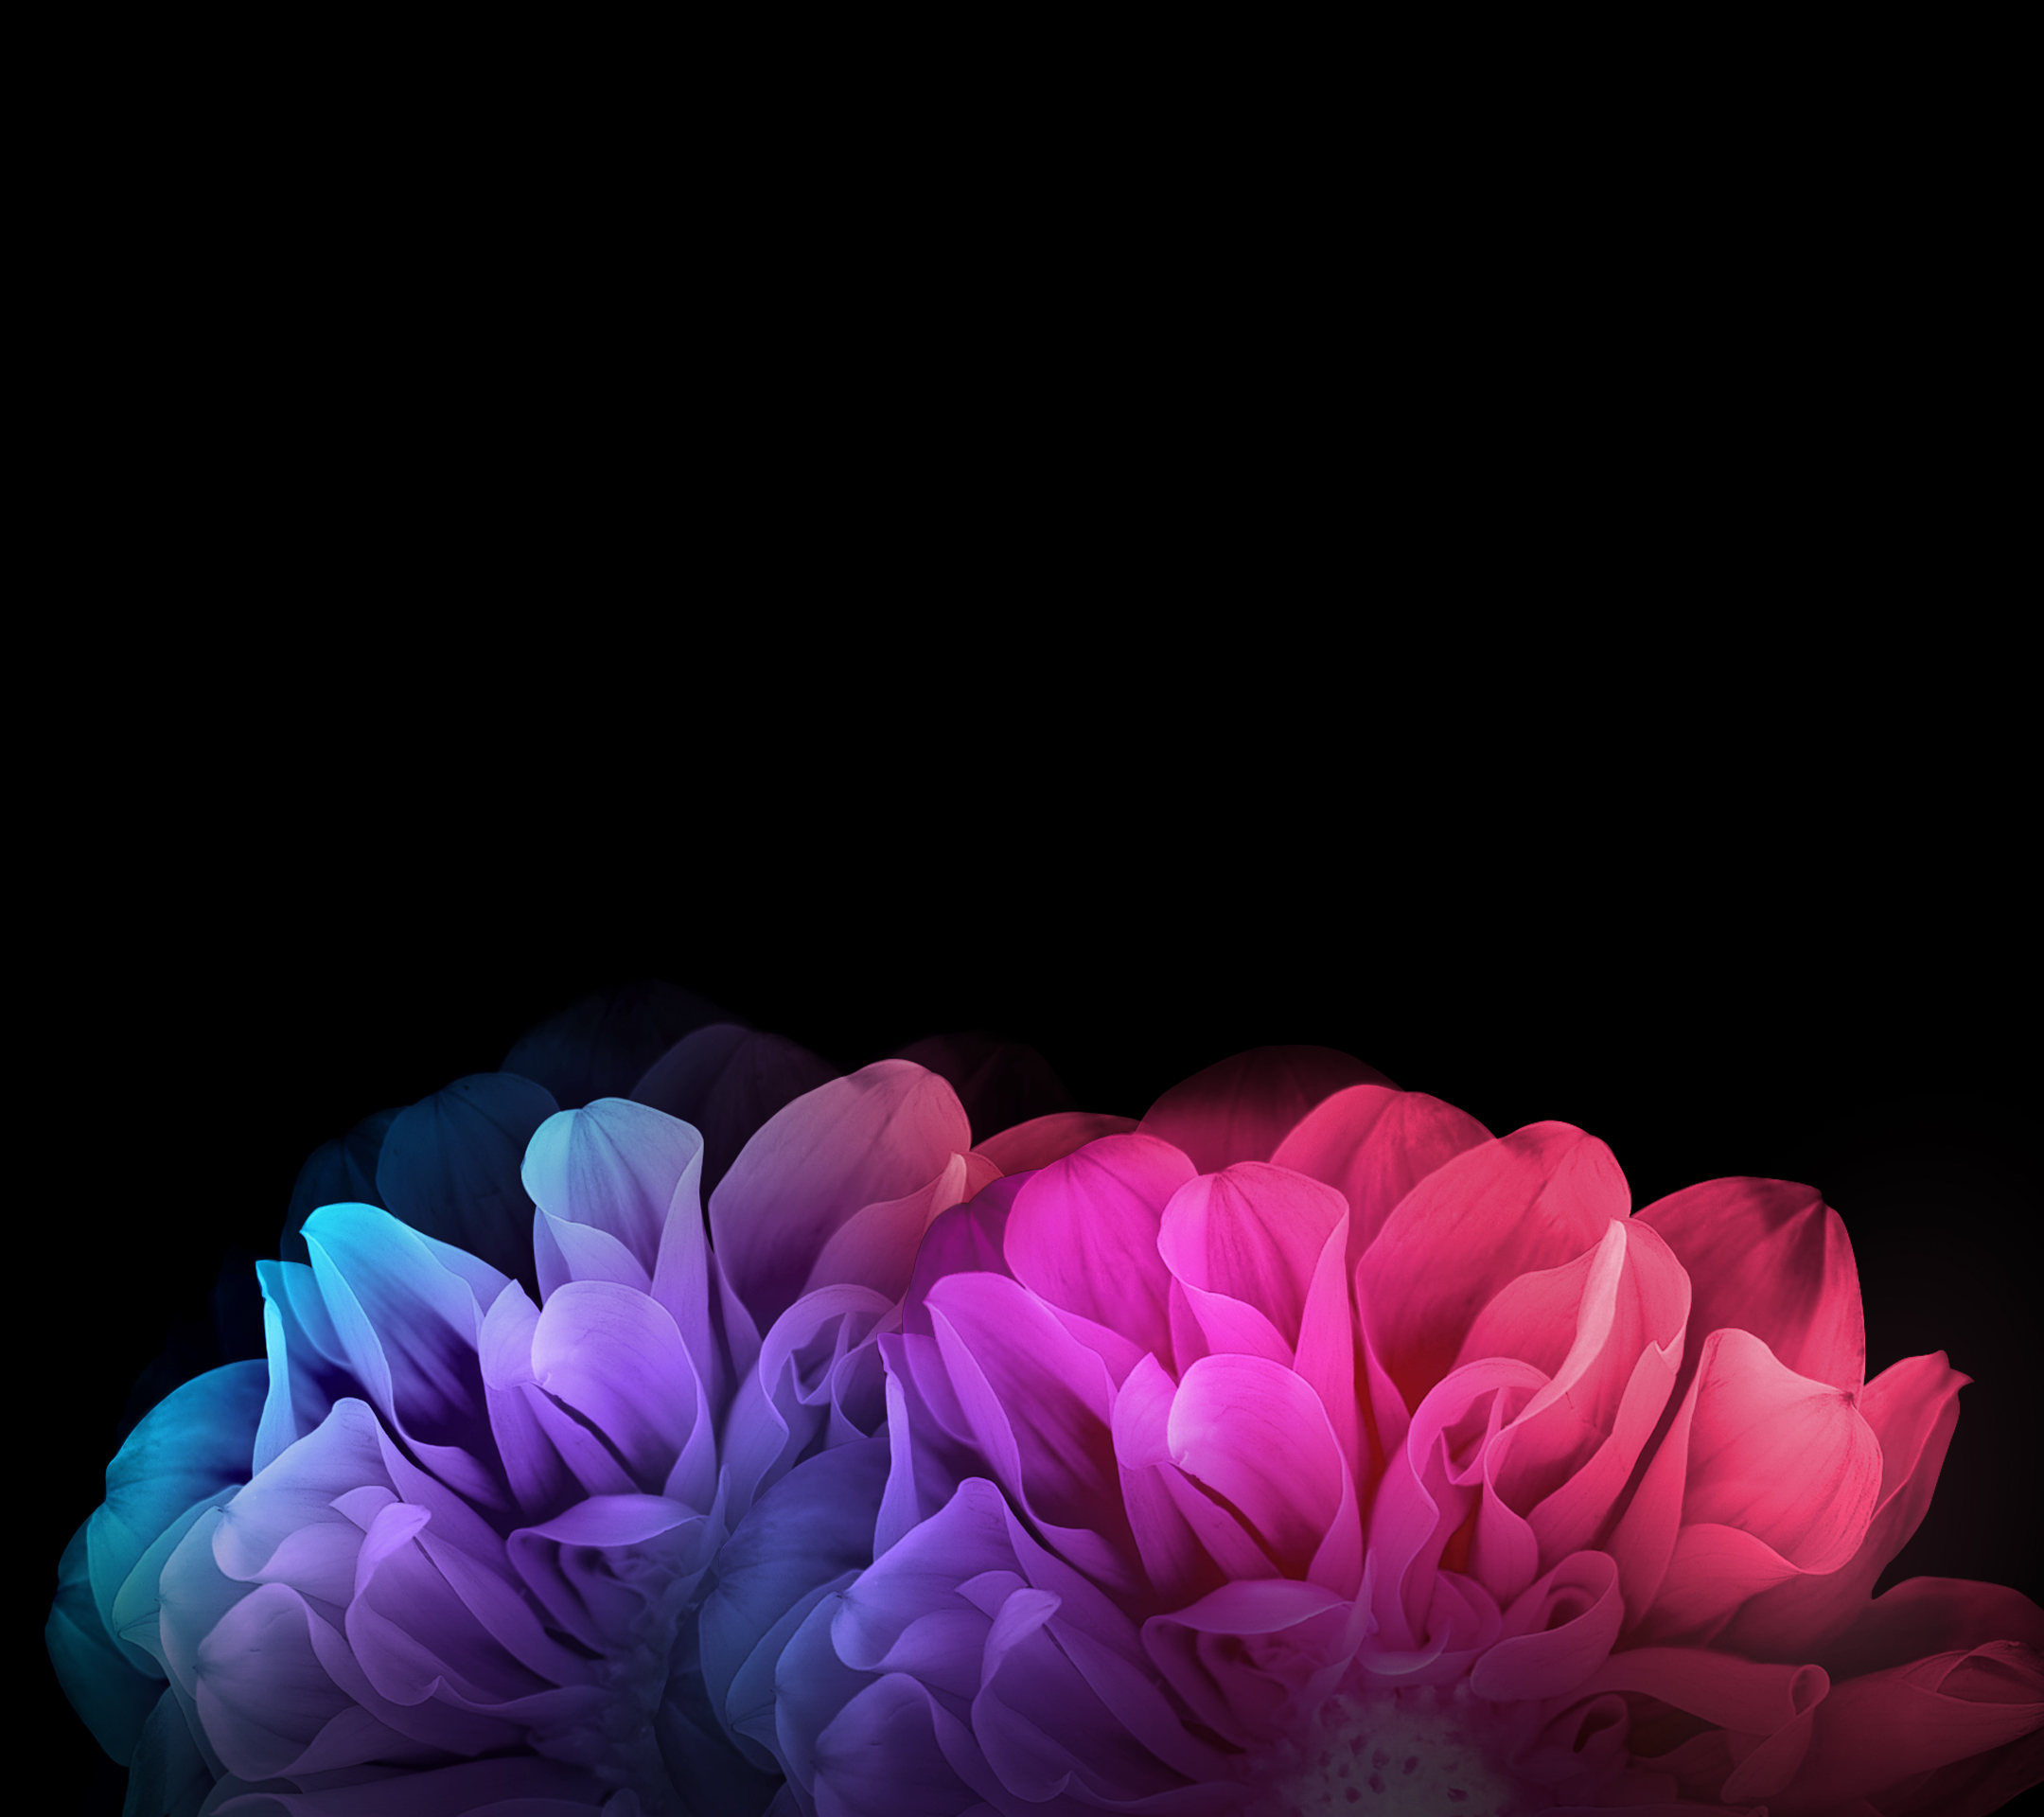 Download the LG G Flex 2 wallpapers for your Android AndroidGuys